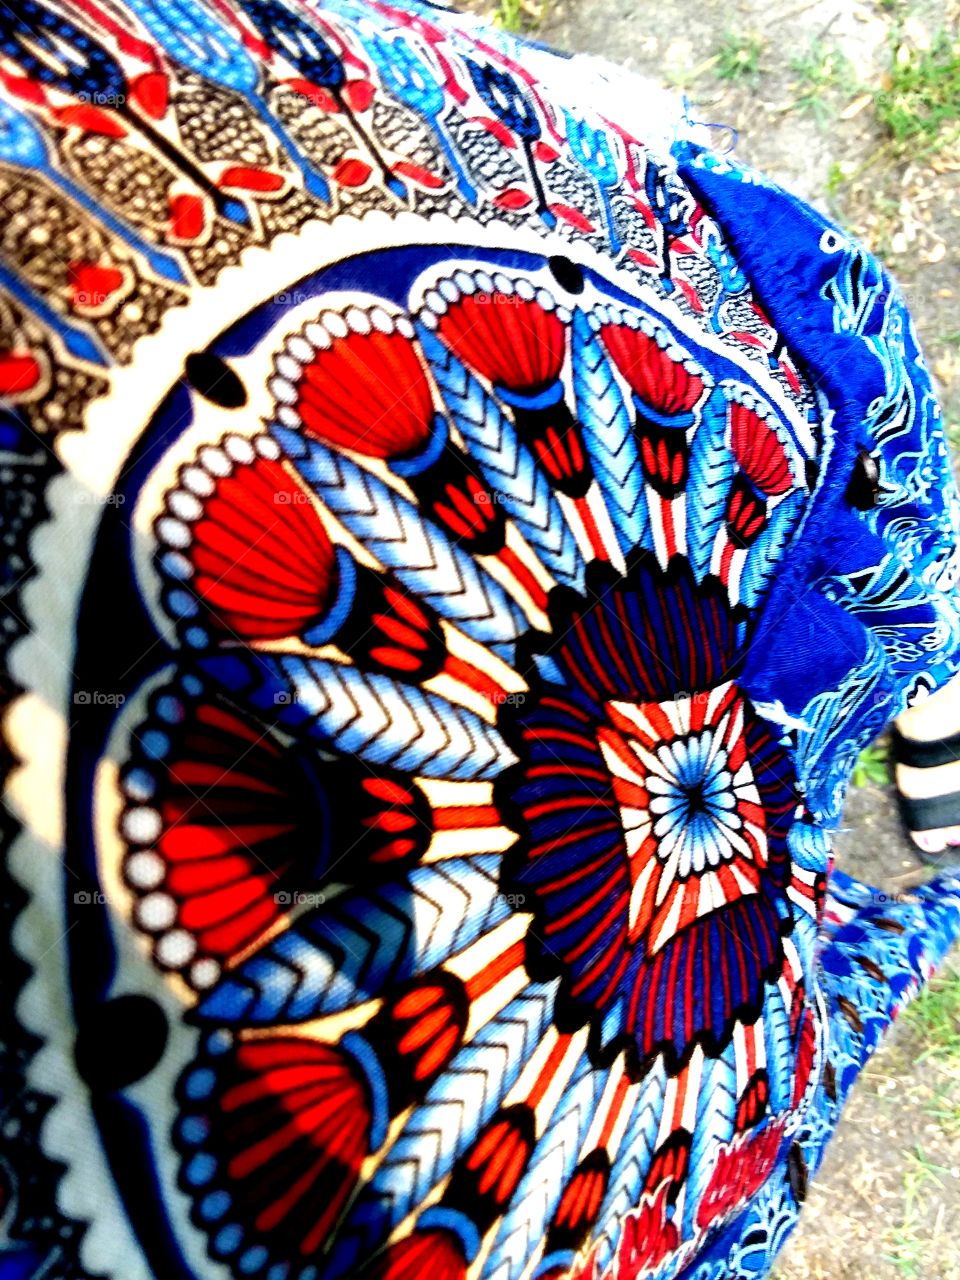 dress fabric blowing in the afternoon breeze...love colors